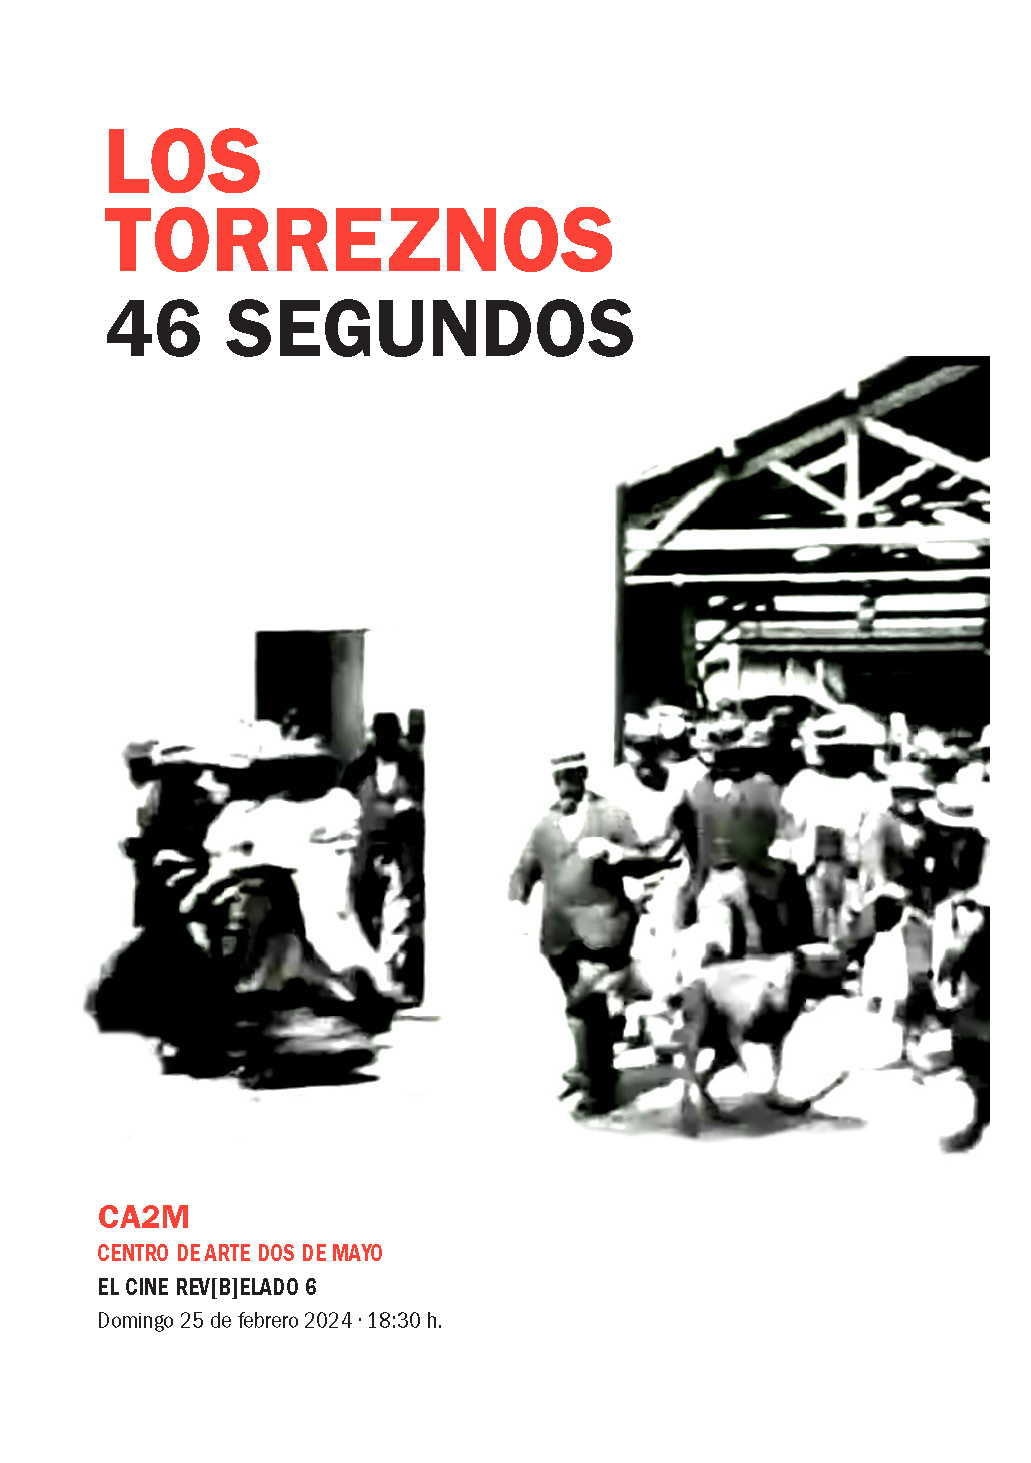 >FORTY SIX SECONDS BY LOS TORREZNOS AT THE CA2M